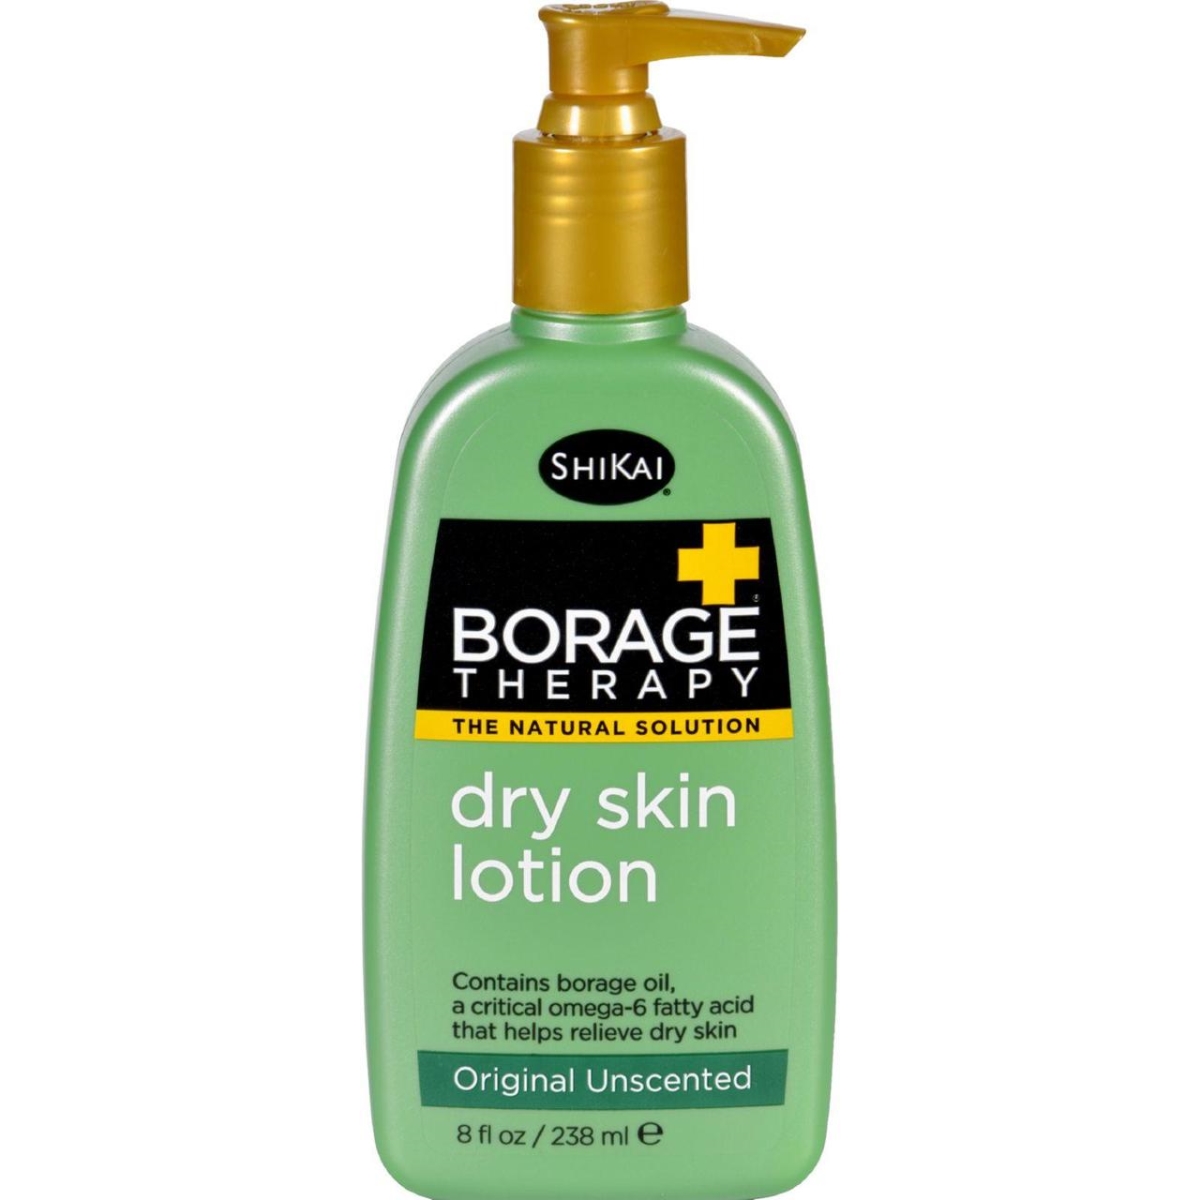 Hg0947630 8 Fl Oz Borage Therapy Dry Skin Lotion - Unscented